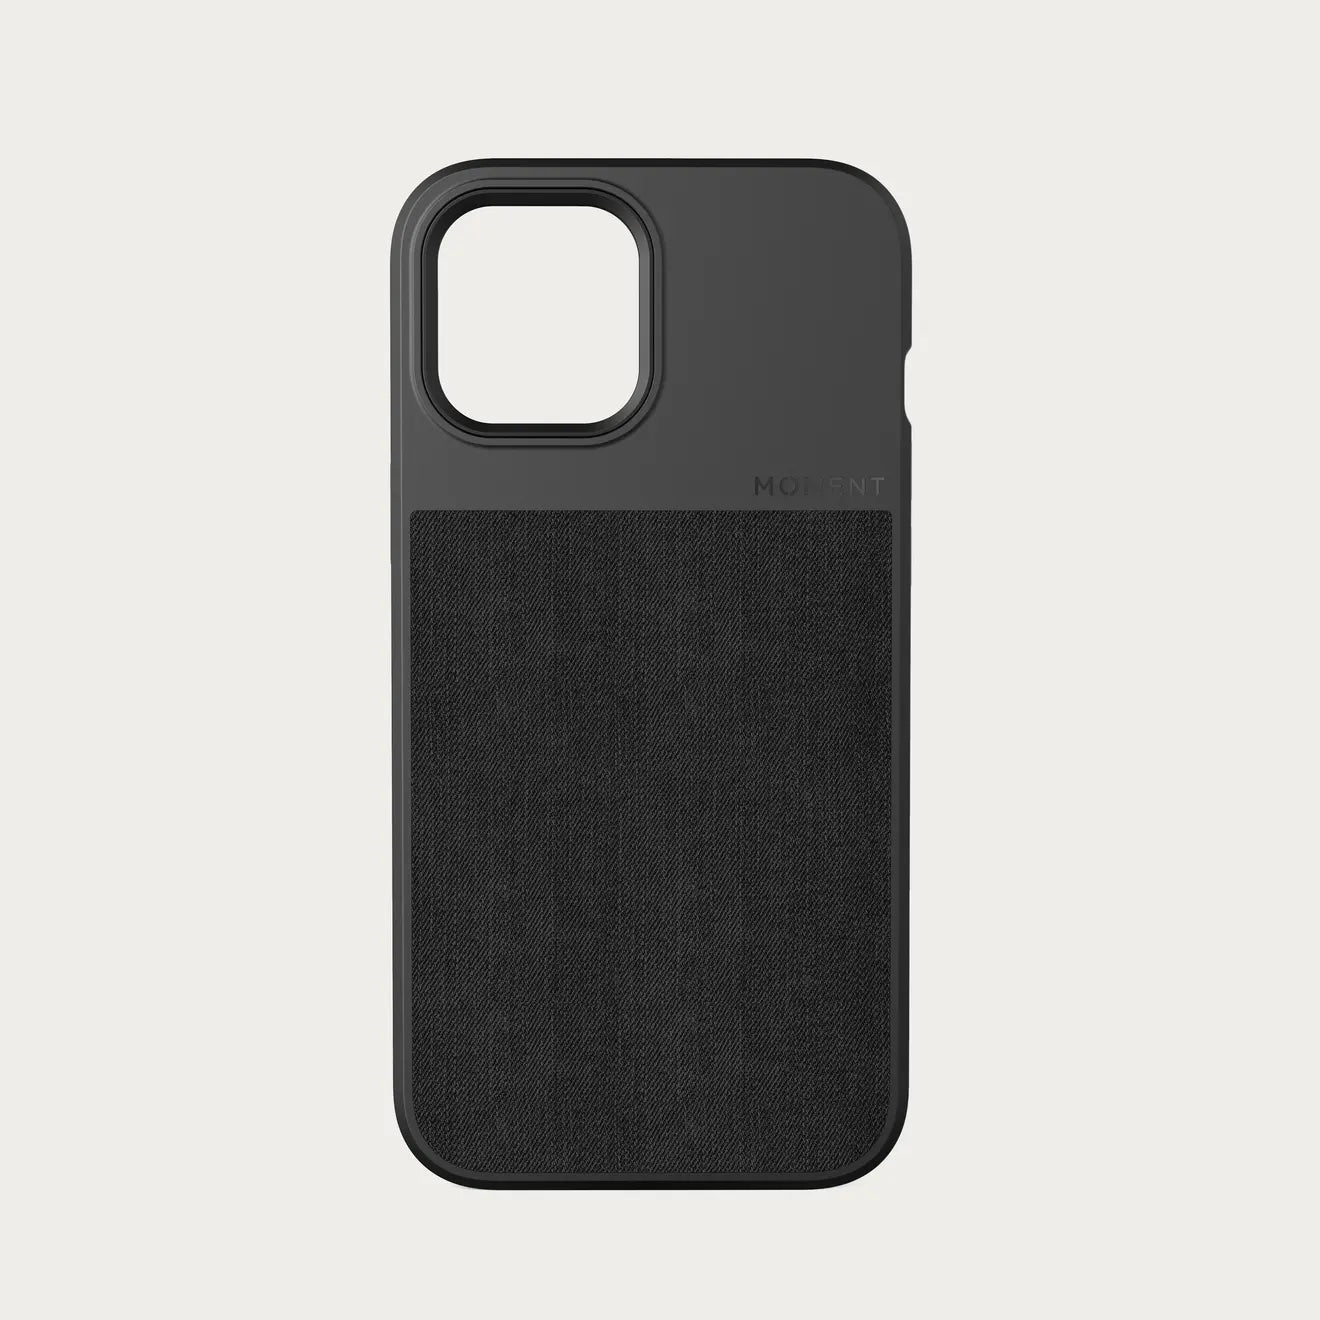 Case with MagSafe for iPhone 12 Series